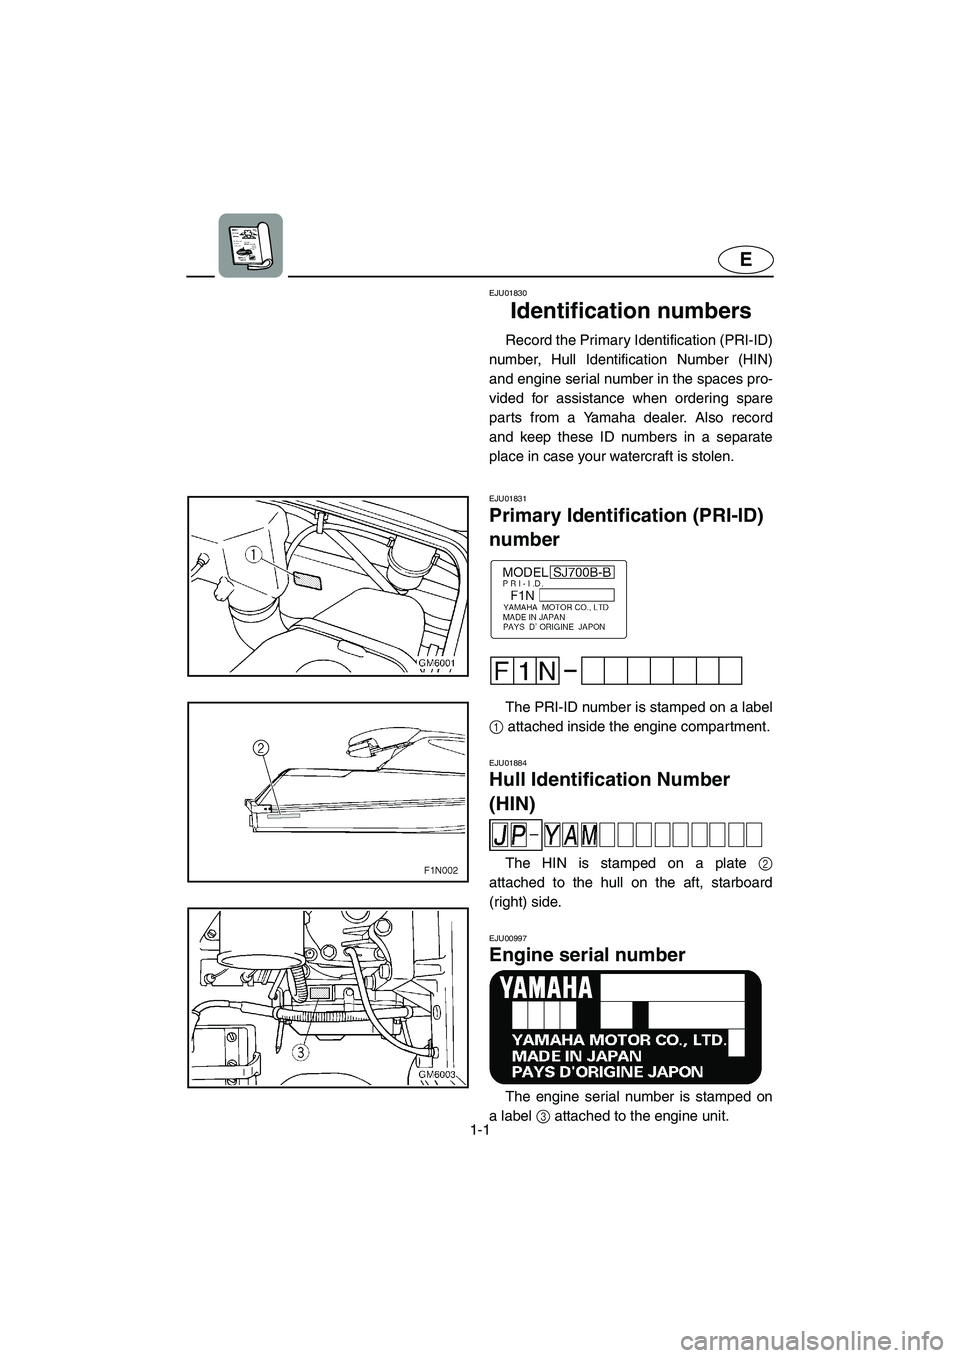 YAMAHA SUPERJET 2003  Owners Manual 1-1
E
EJU01830
Identification numbers 
Record the Primary Identification (PRI-ID)
number, Hull Identification Number (HIN)
and engine serial number in the spaces pro-
vided for assistance when orderin